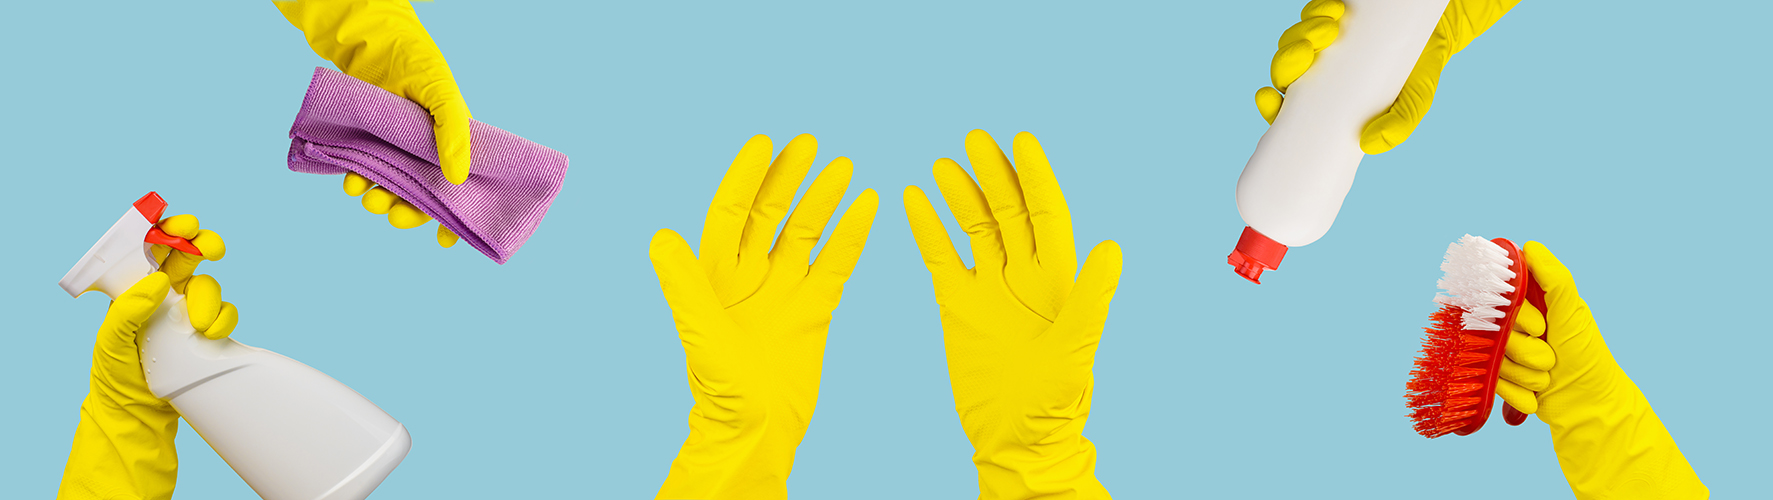 cleaning brush, gloves and cloth on blue background